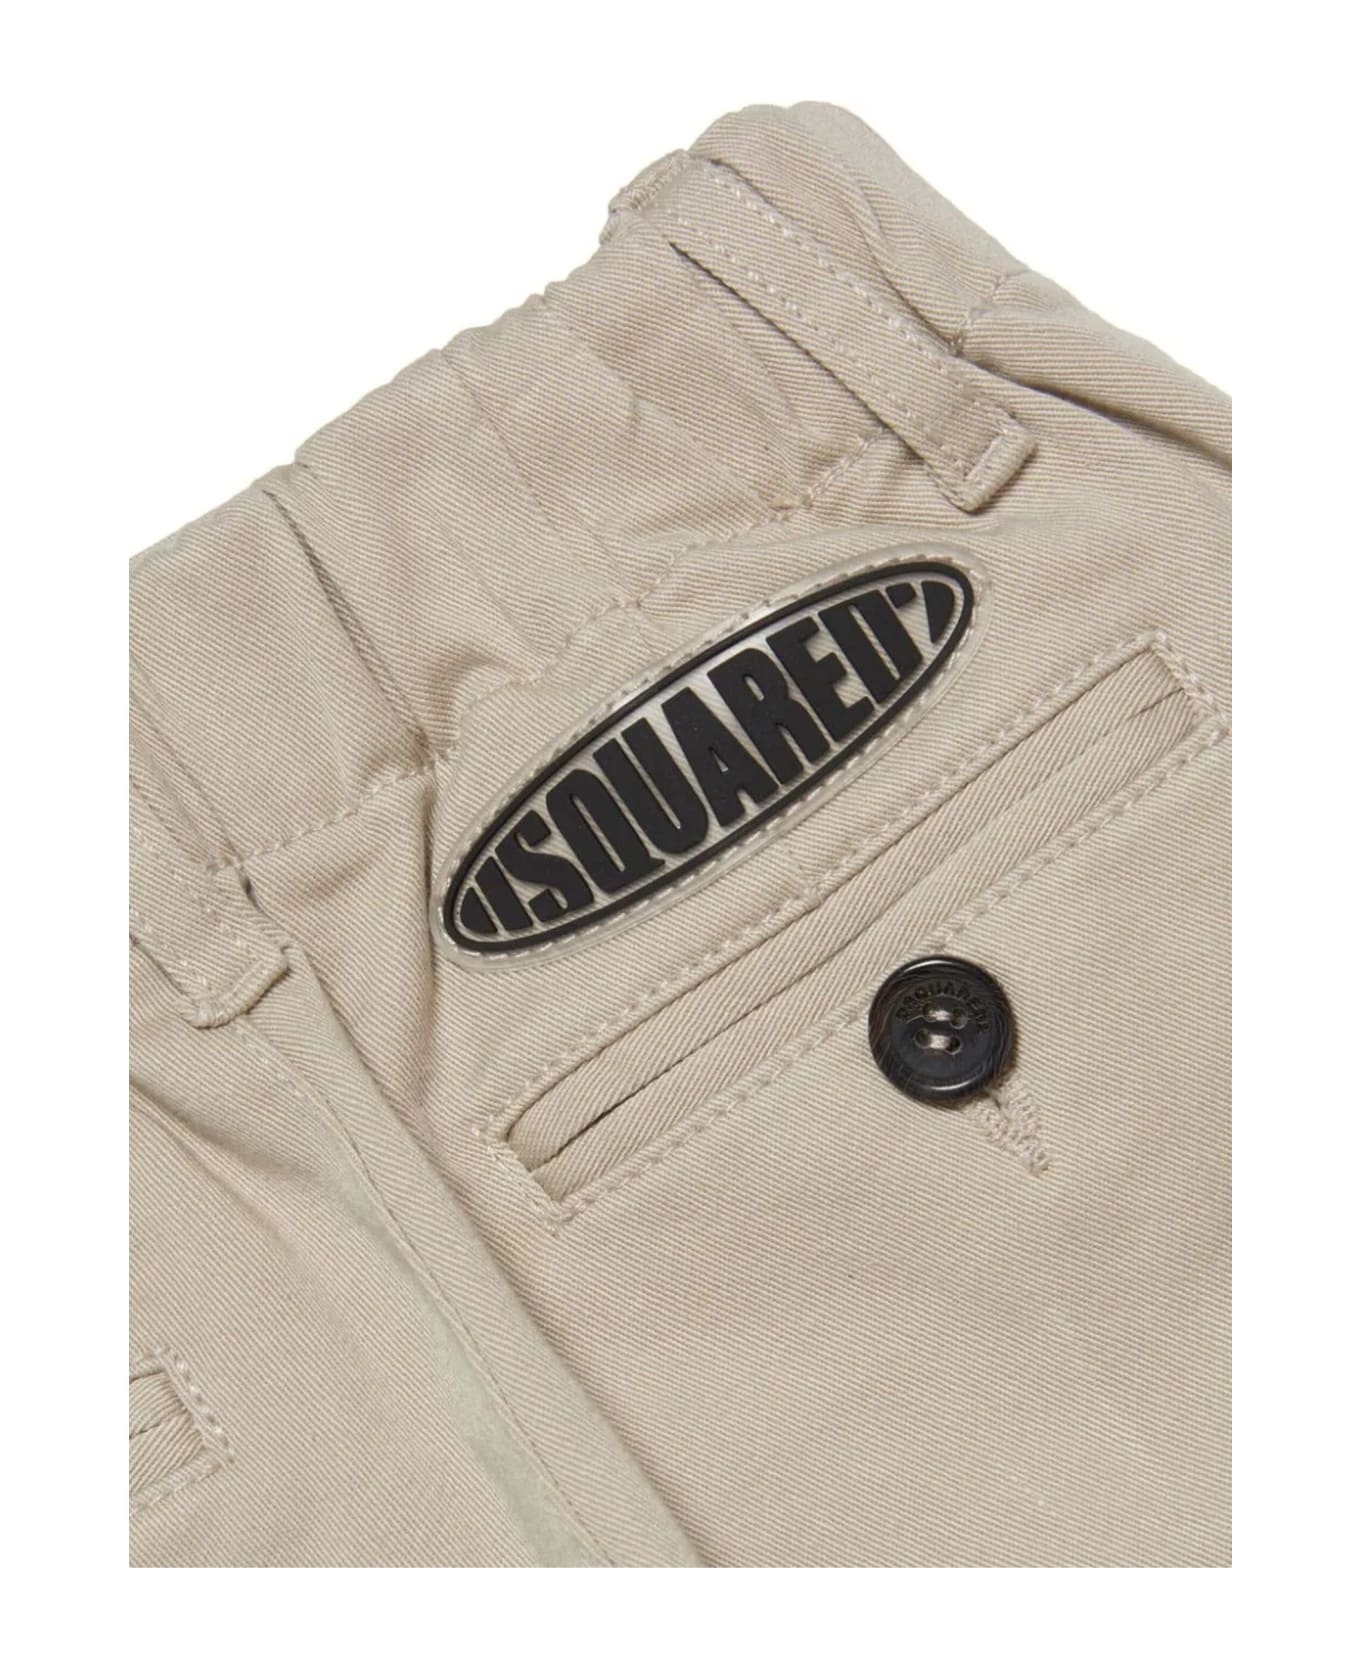 Dsquared2 Trousers Beige - Beige ボトムス